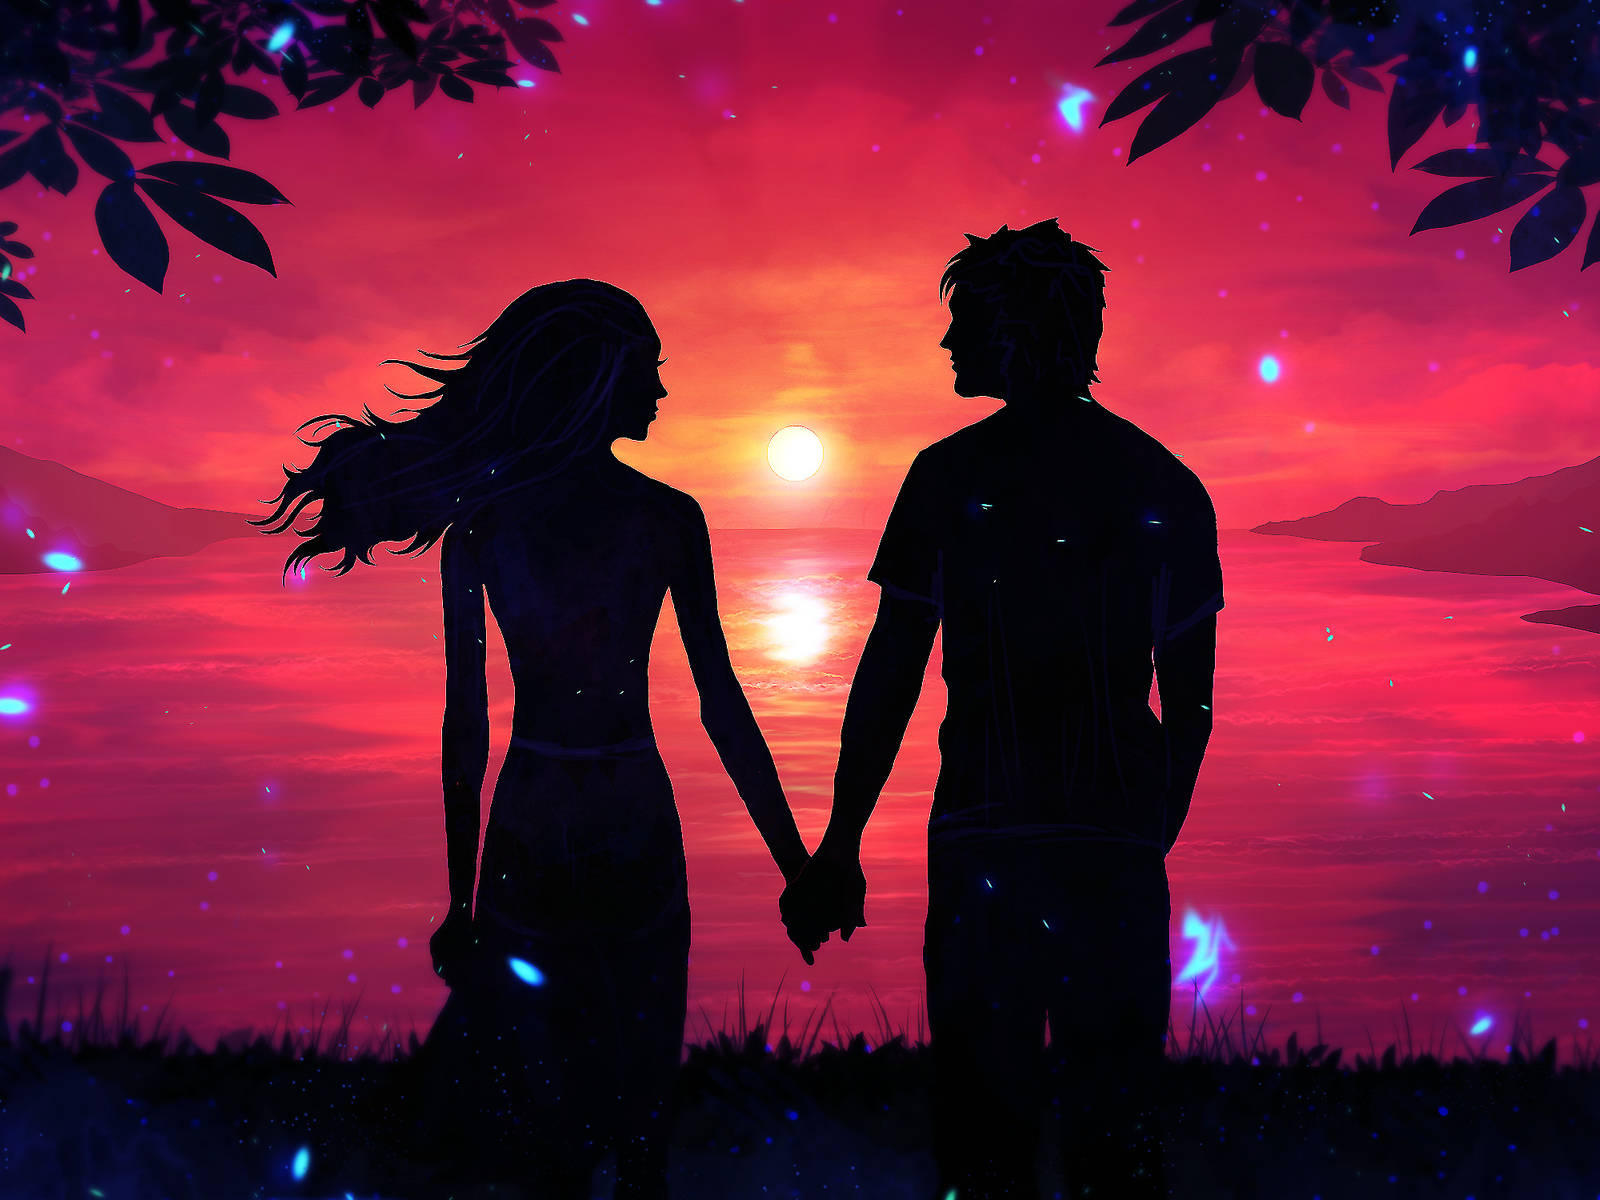 Holding Hands While Facing Sunset Silhouette Digital Art Background